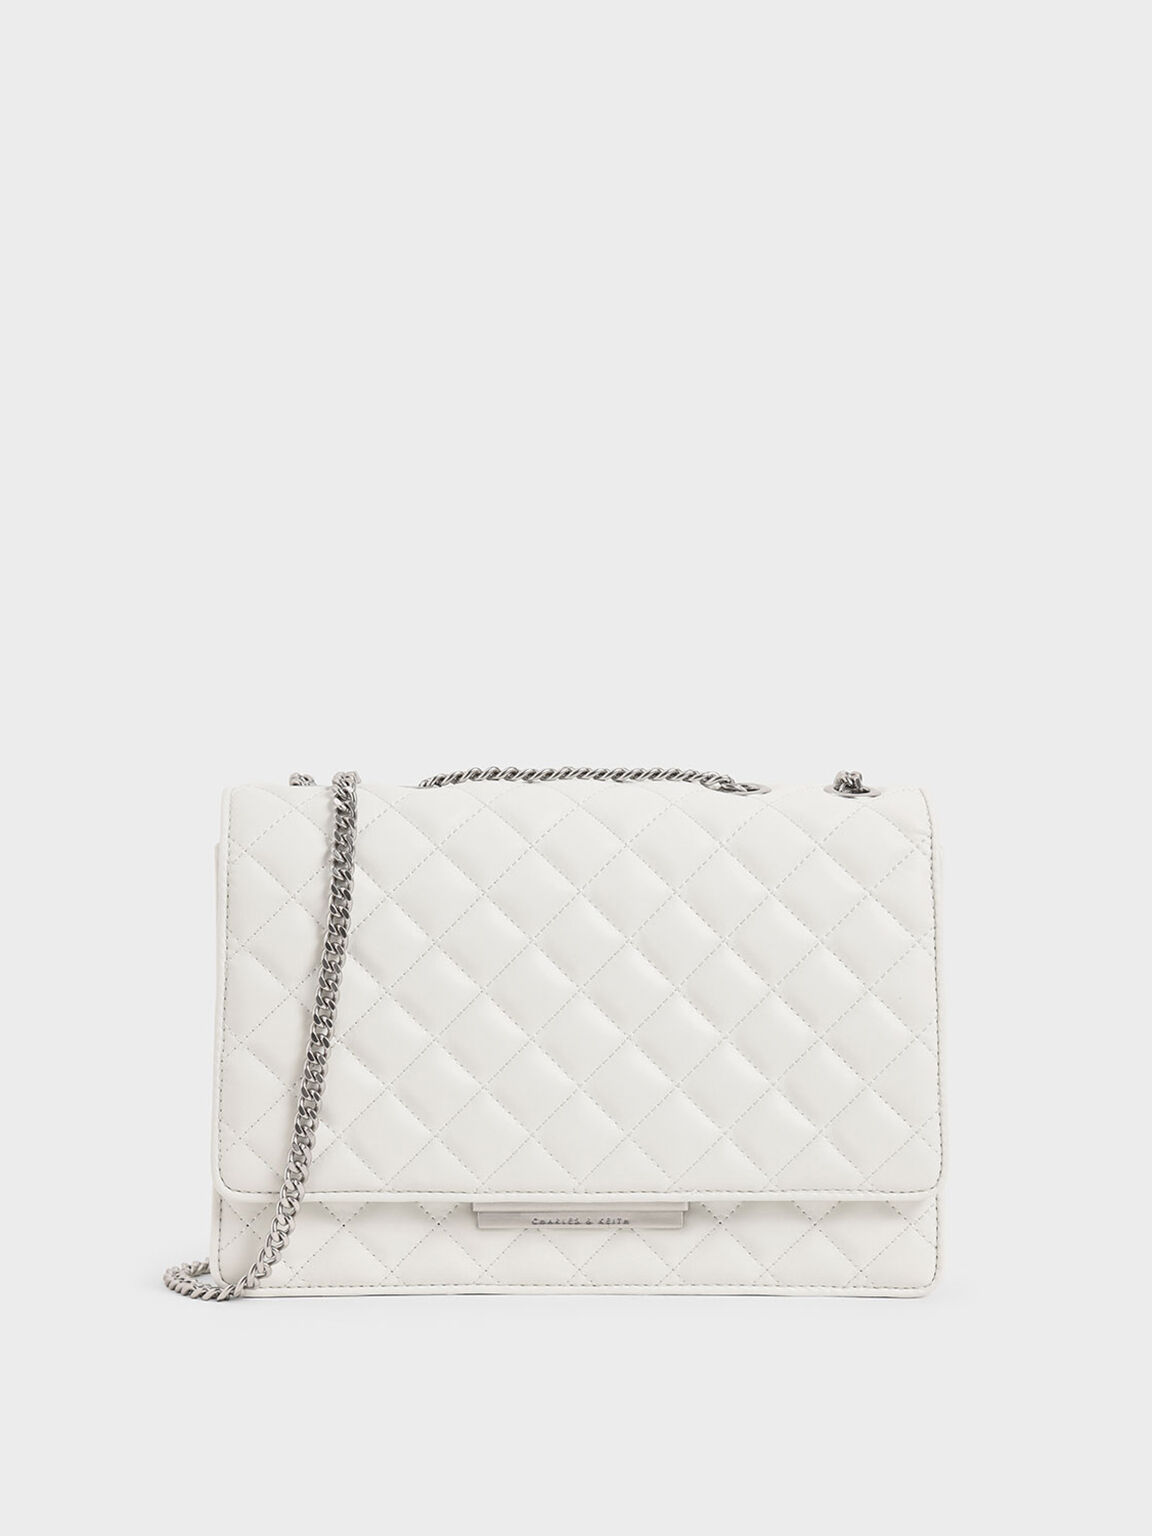 River Island quilted cross body bag with chain strap in white | ASOS